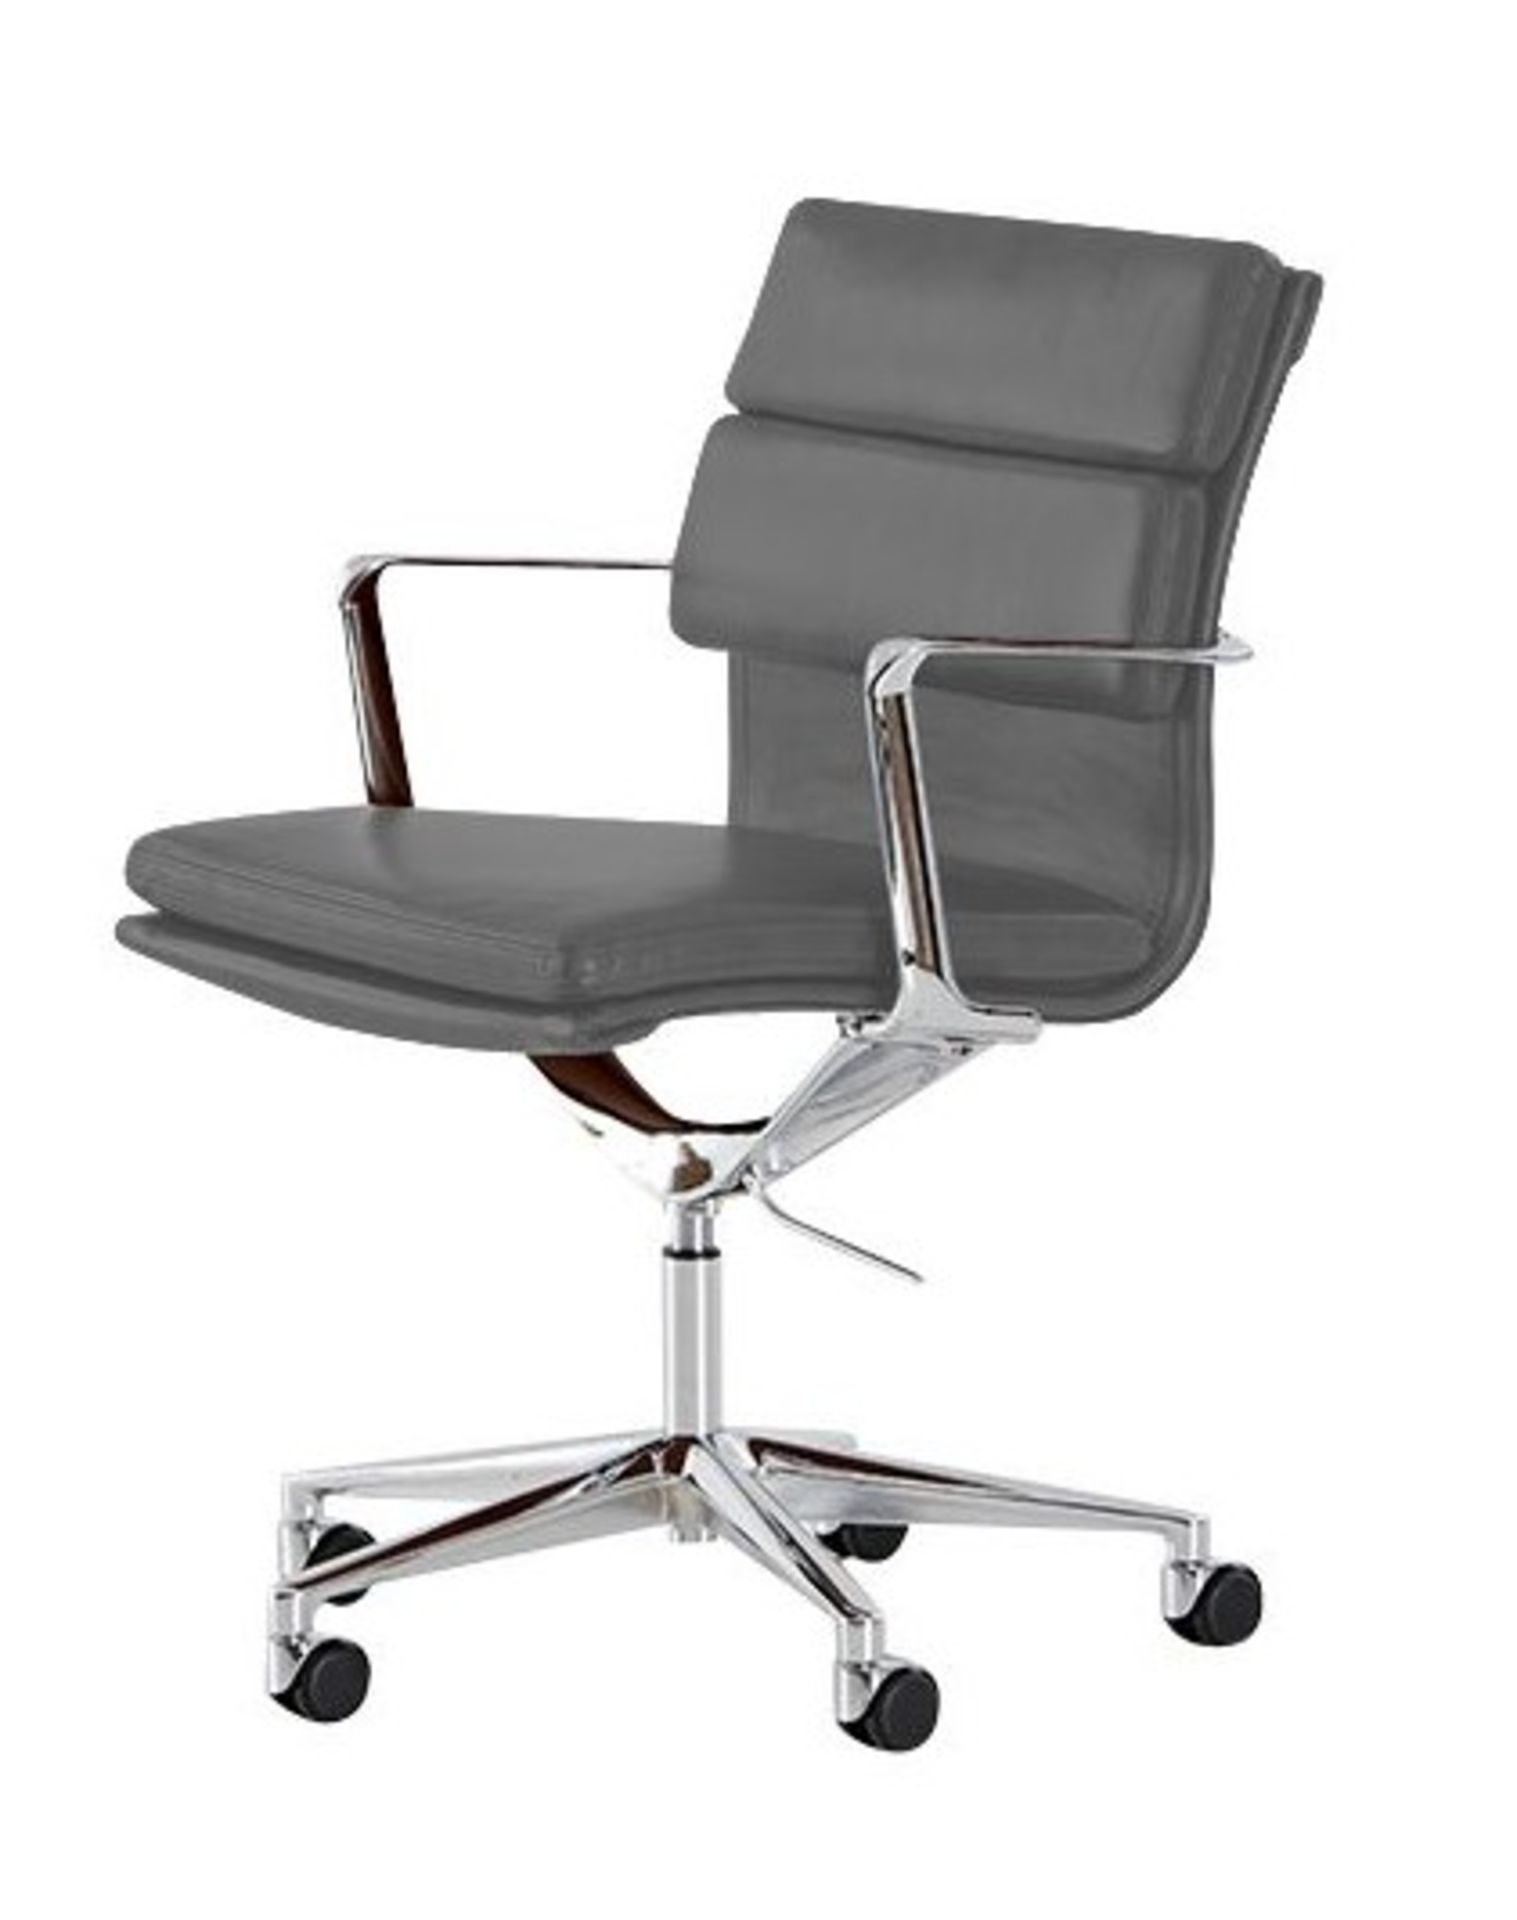 1 x Eames Inspired Office Chair - Swivel Office Chair Upholstered in Black Leather